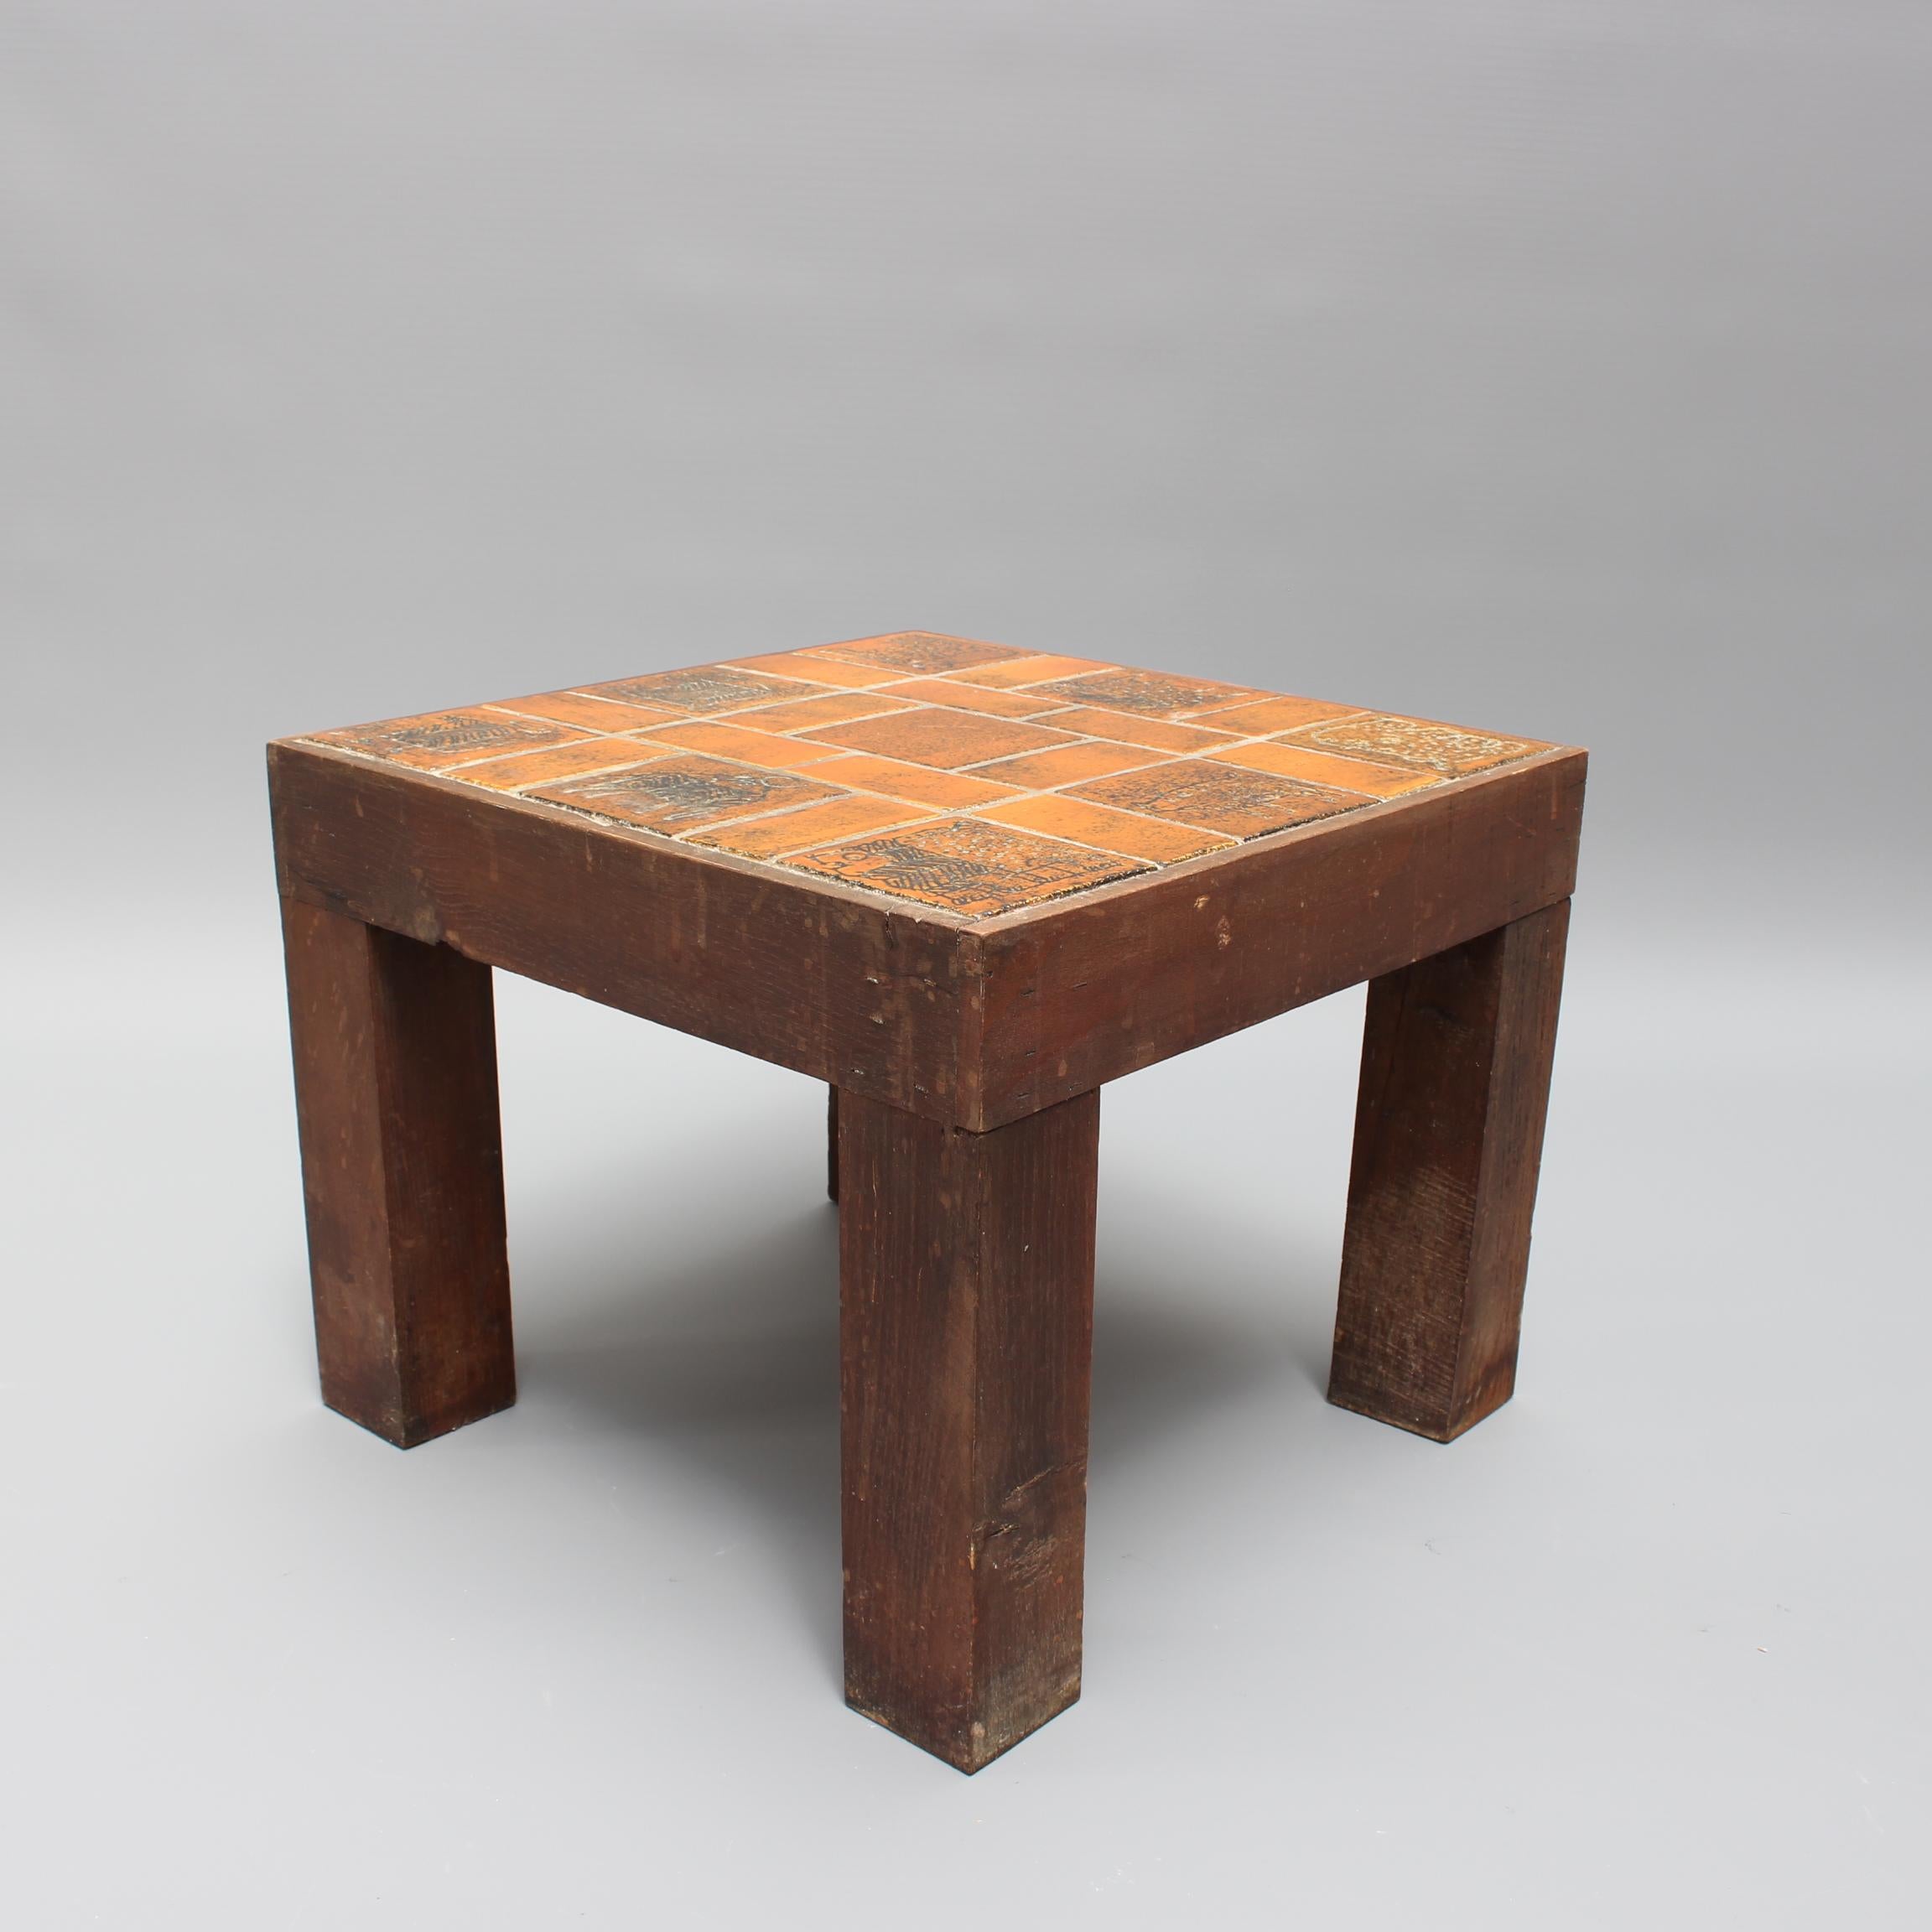 Vintage French Square Side Table with Ceramic Tile Top by Jacques Blin, c. 1950s For Sale 2